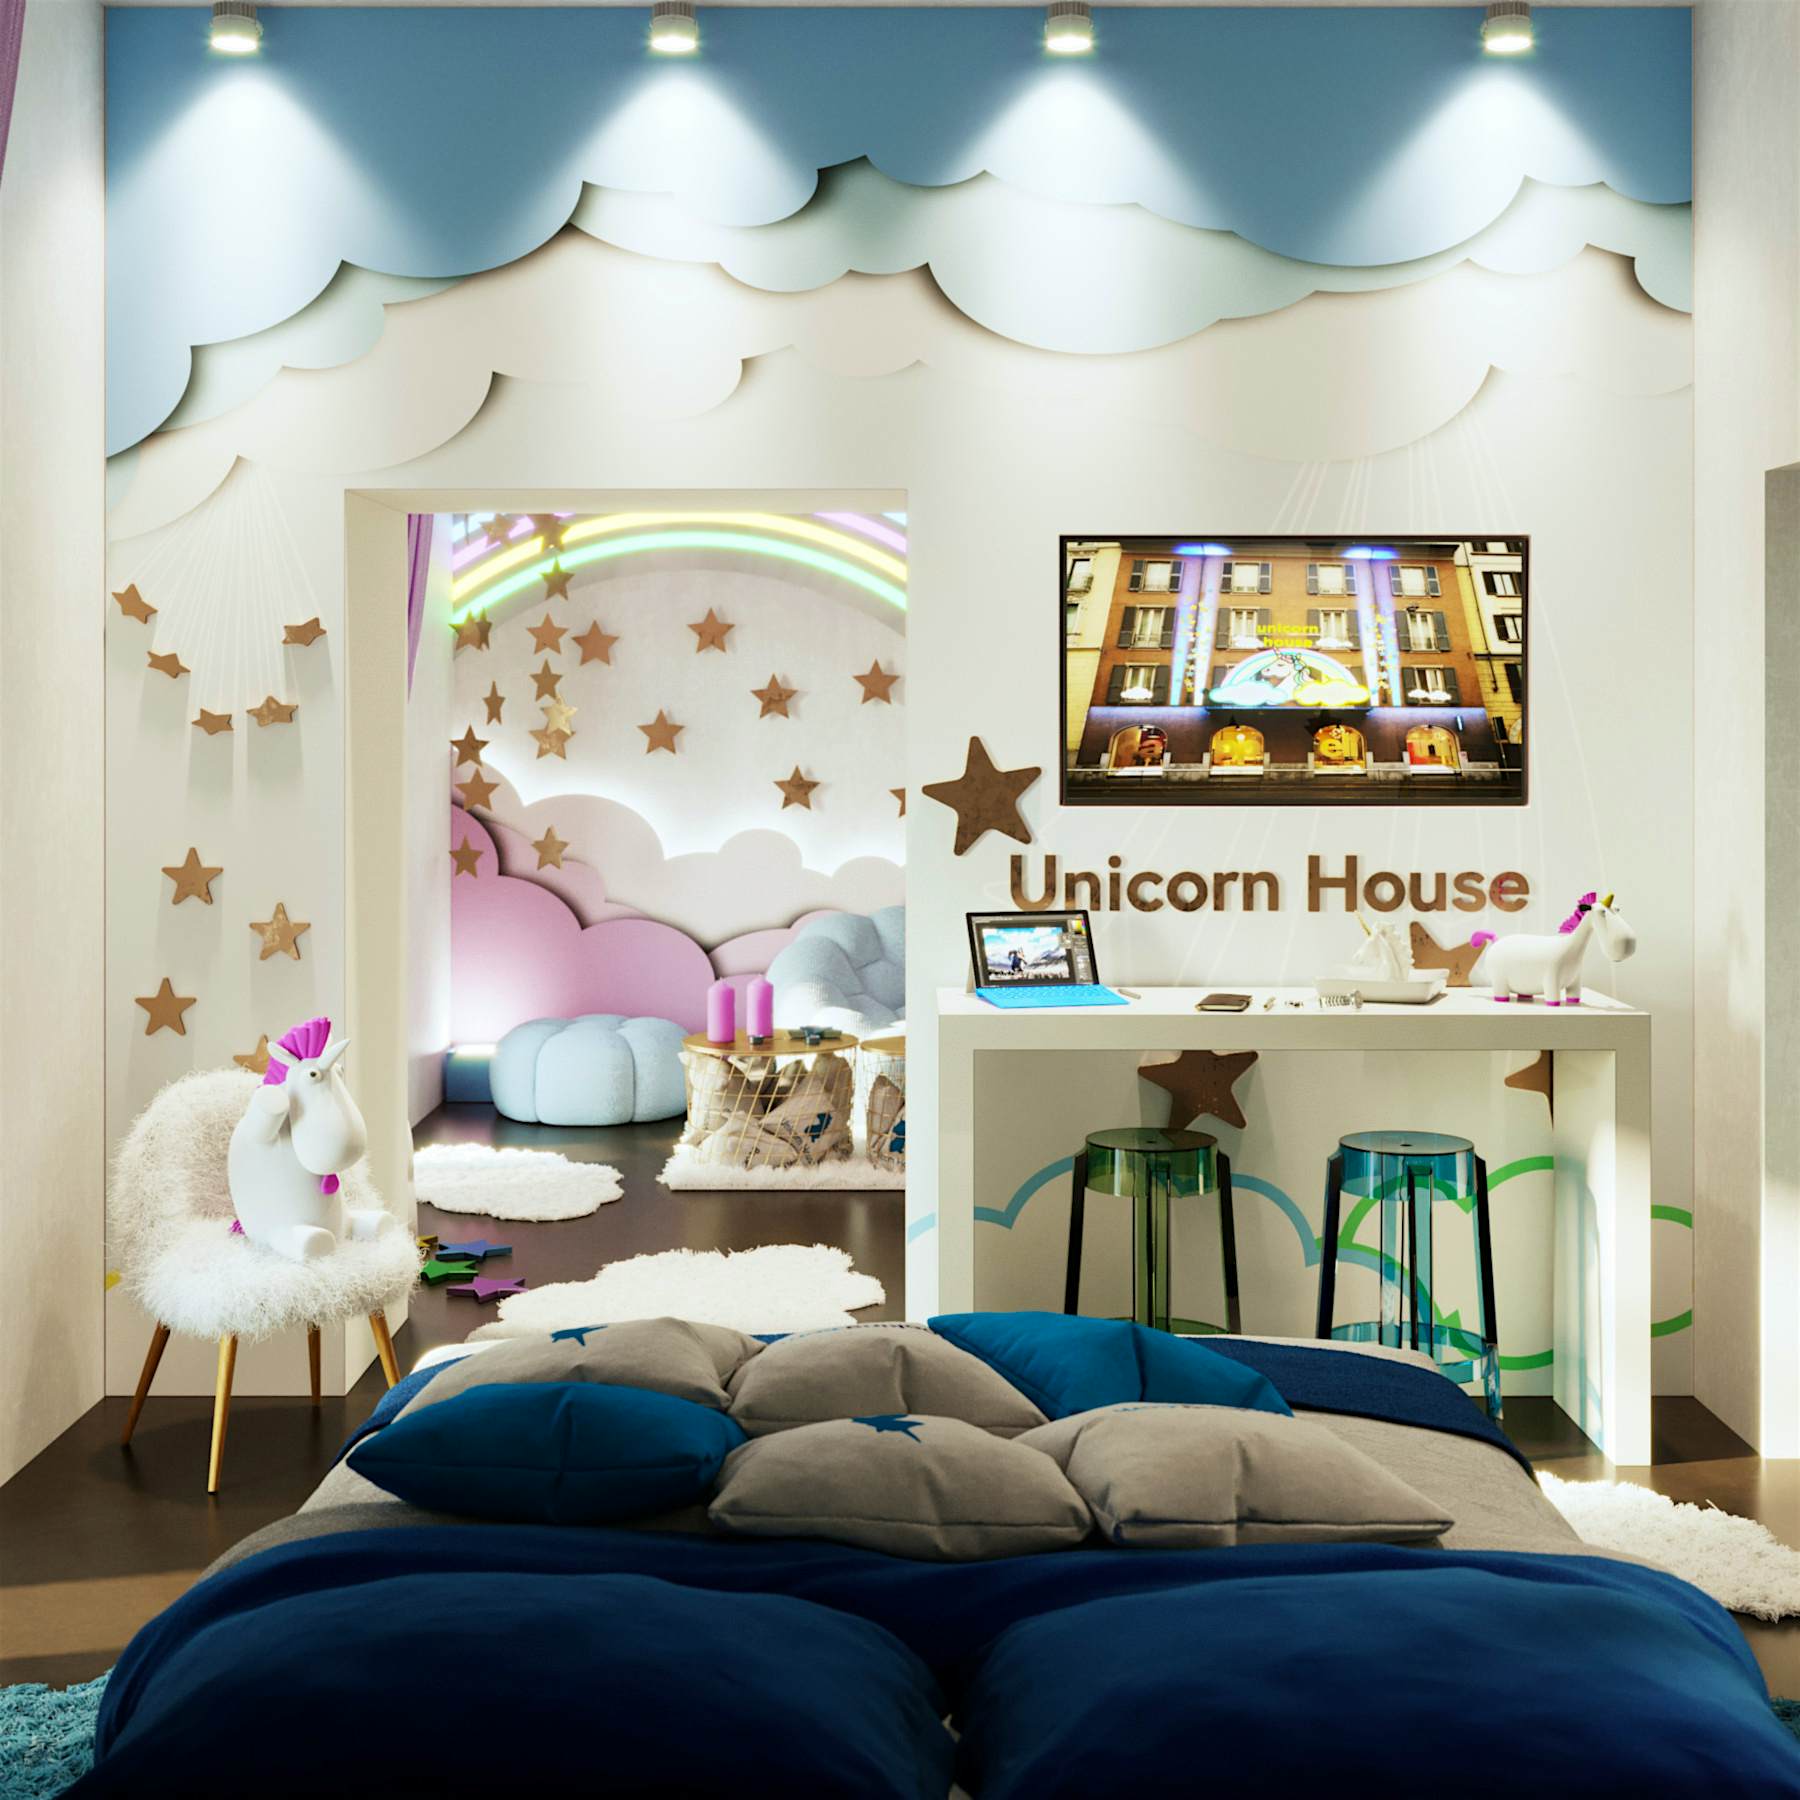 You Can Now Sleep In A Unicorn Wonderland In The Middle Of